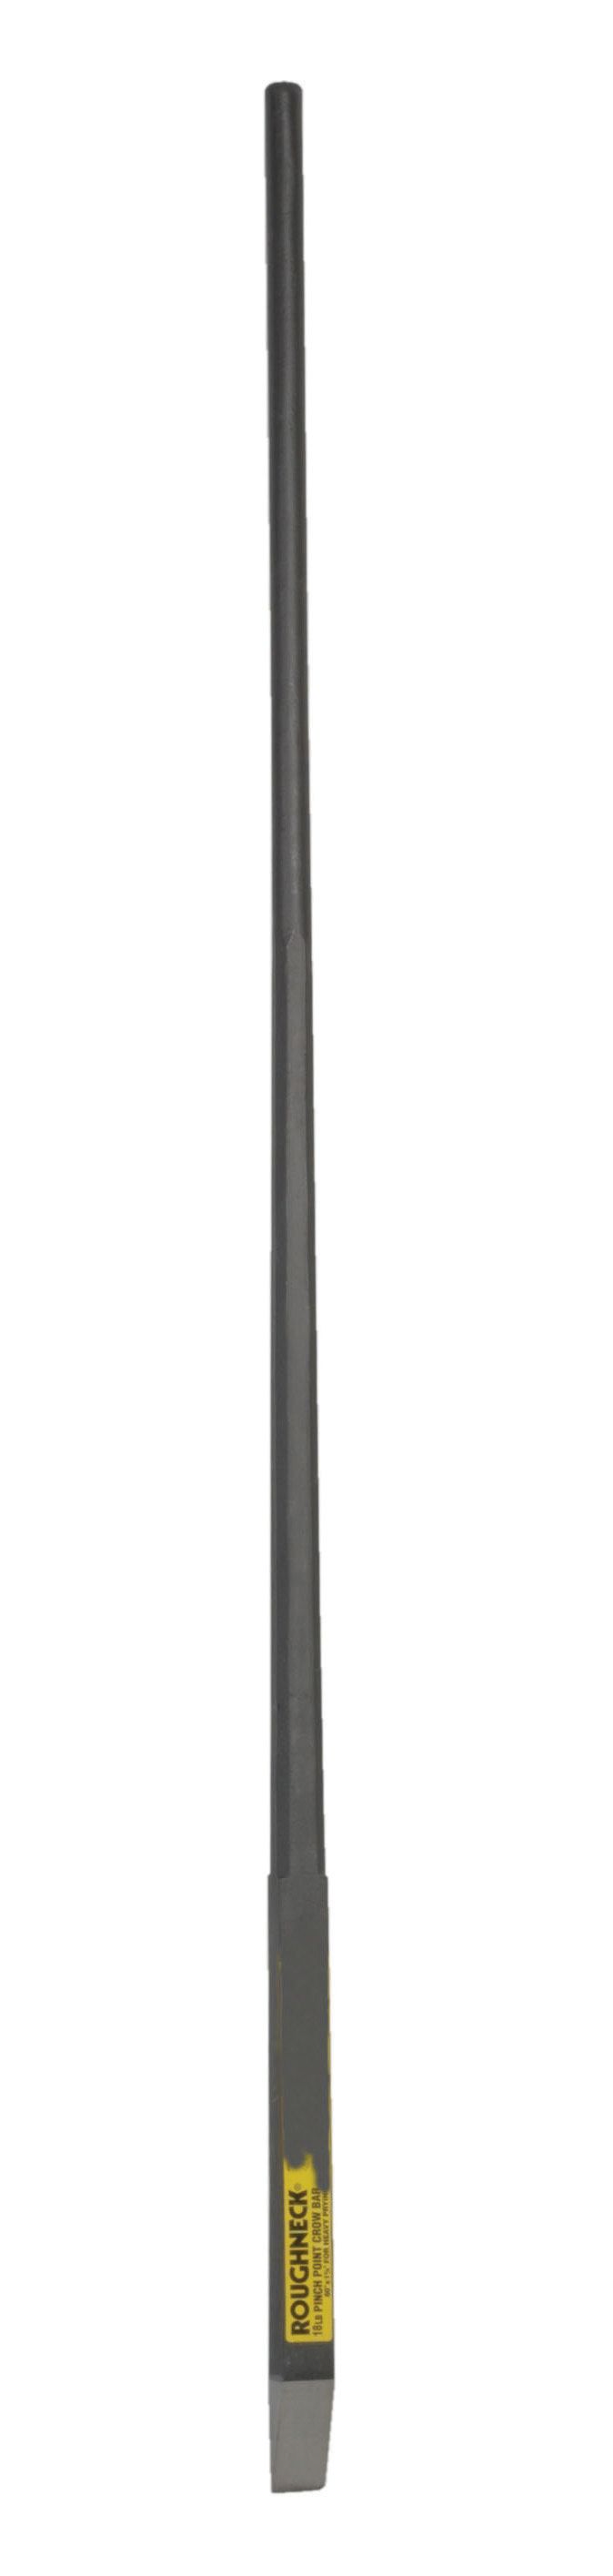 Image of Roughneck 60inch Pinch Point Crow Bar - 18lb